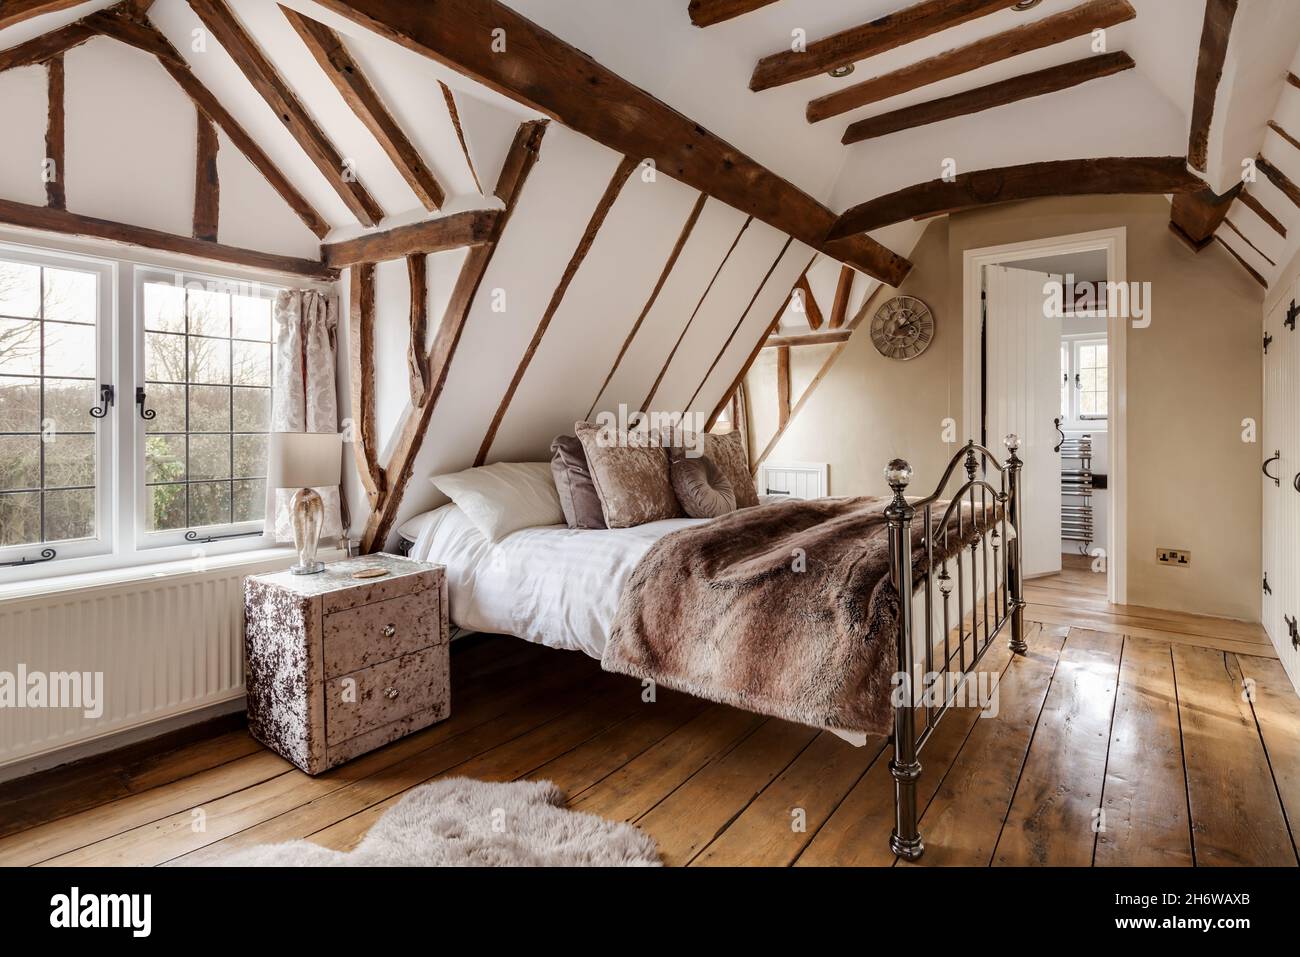 Essex, England - January 18 2019: Heavily beamed bedroom space with sloping ceilings and original floorboards with iron bed Stock Photo